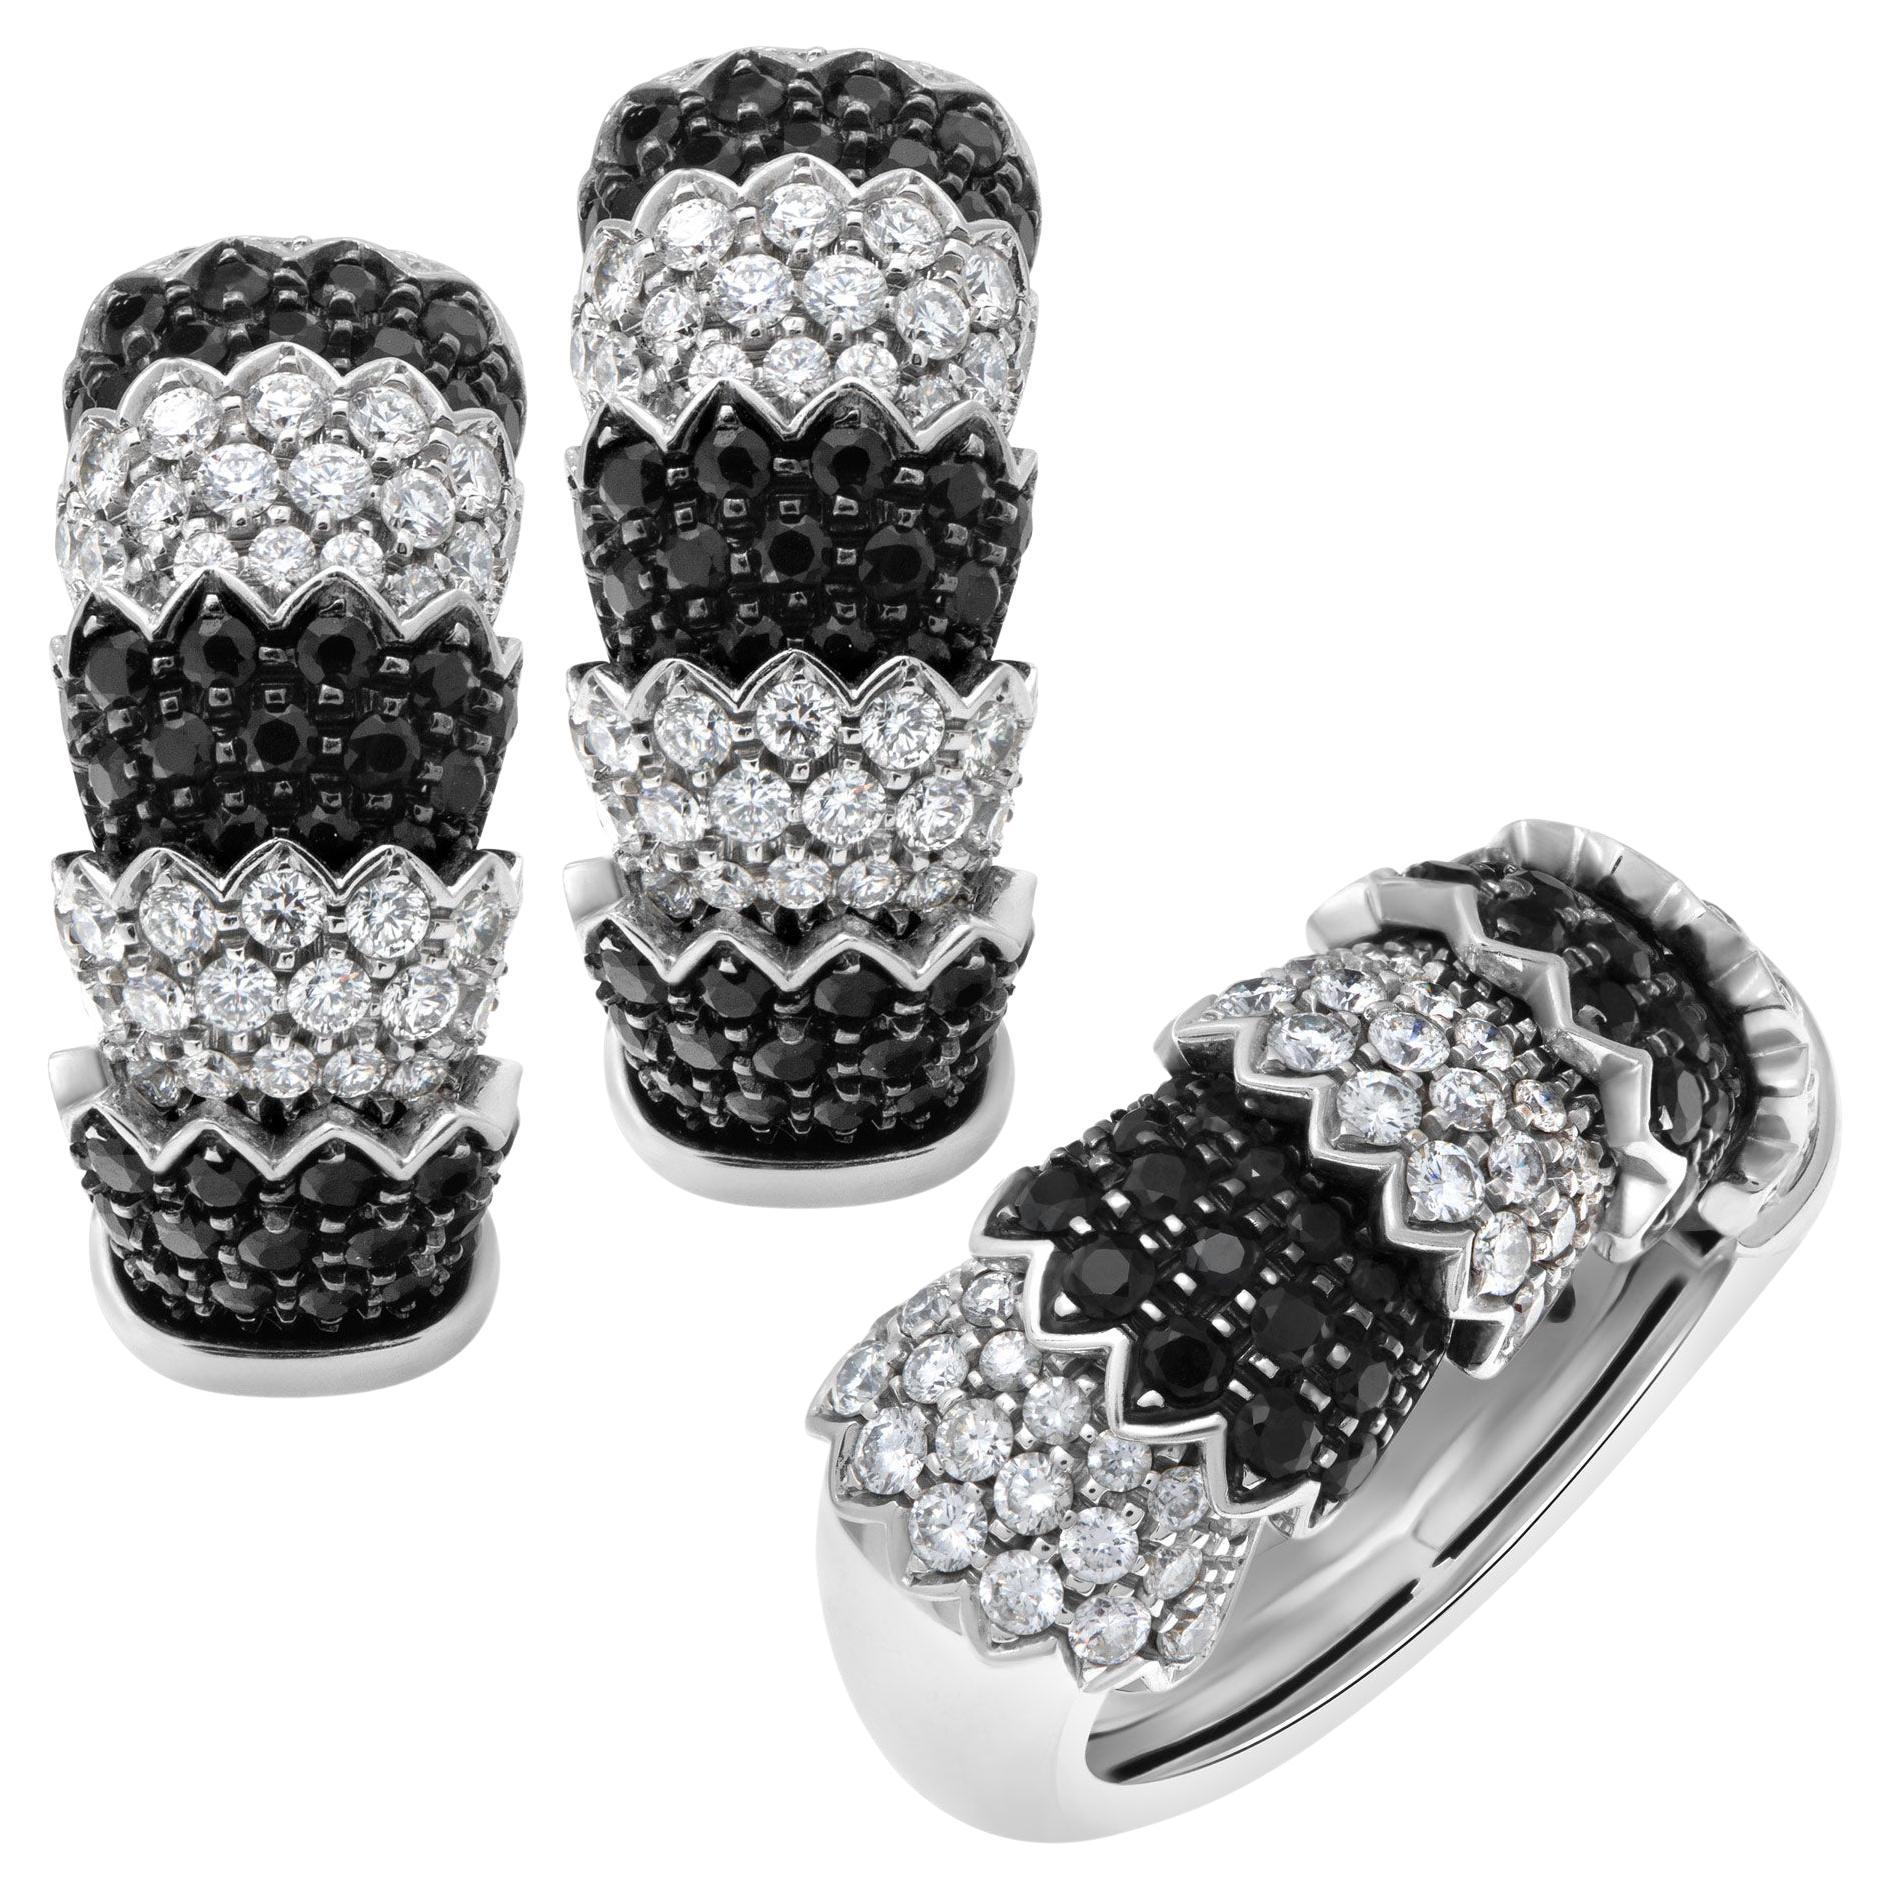 Roberto Coin "Cobra" 18k White Gold Earrings and Ring For Sale